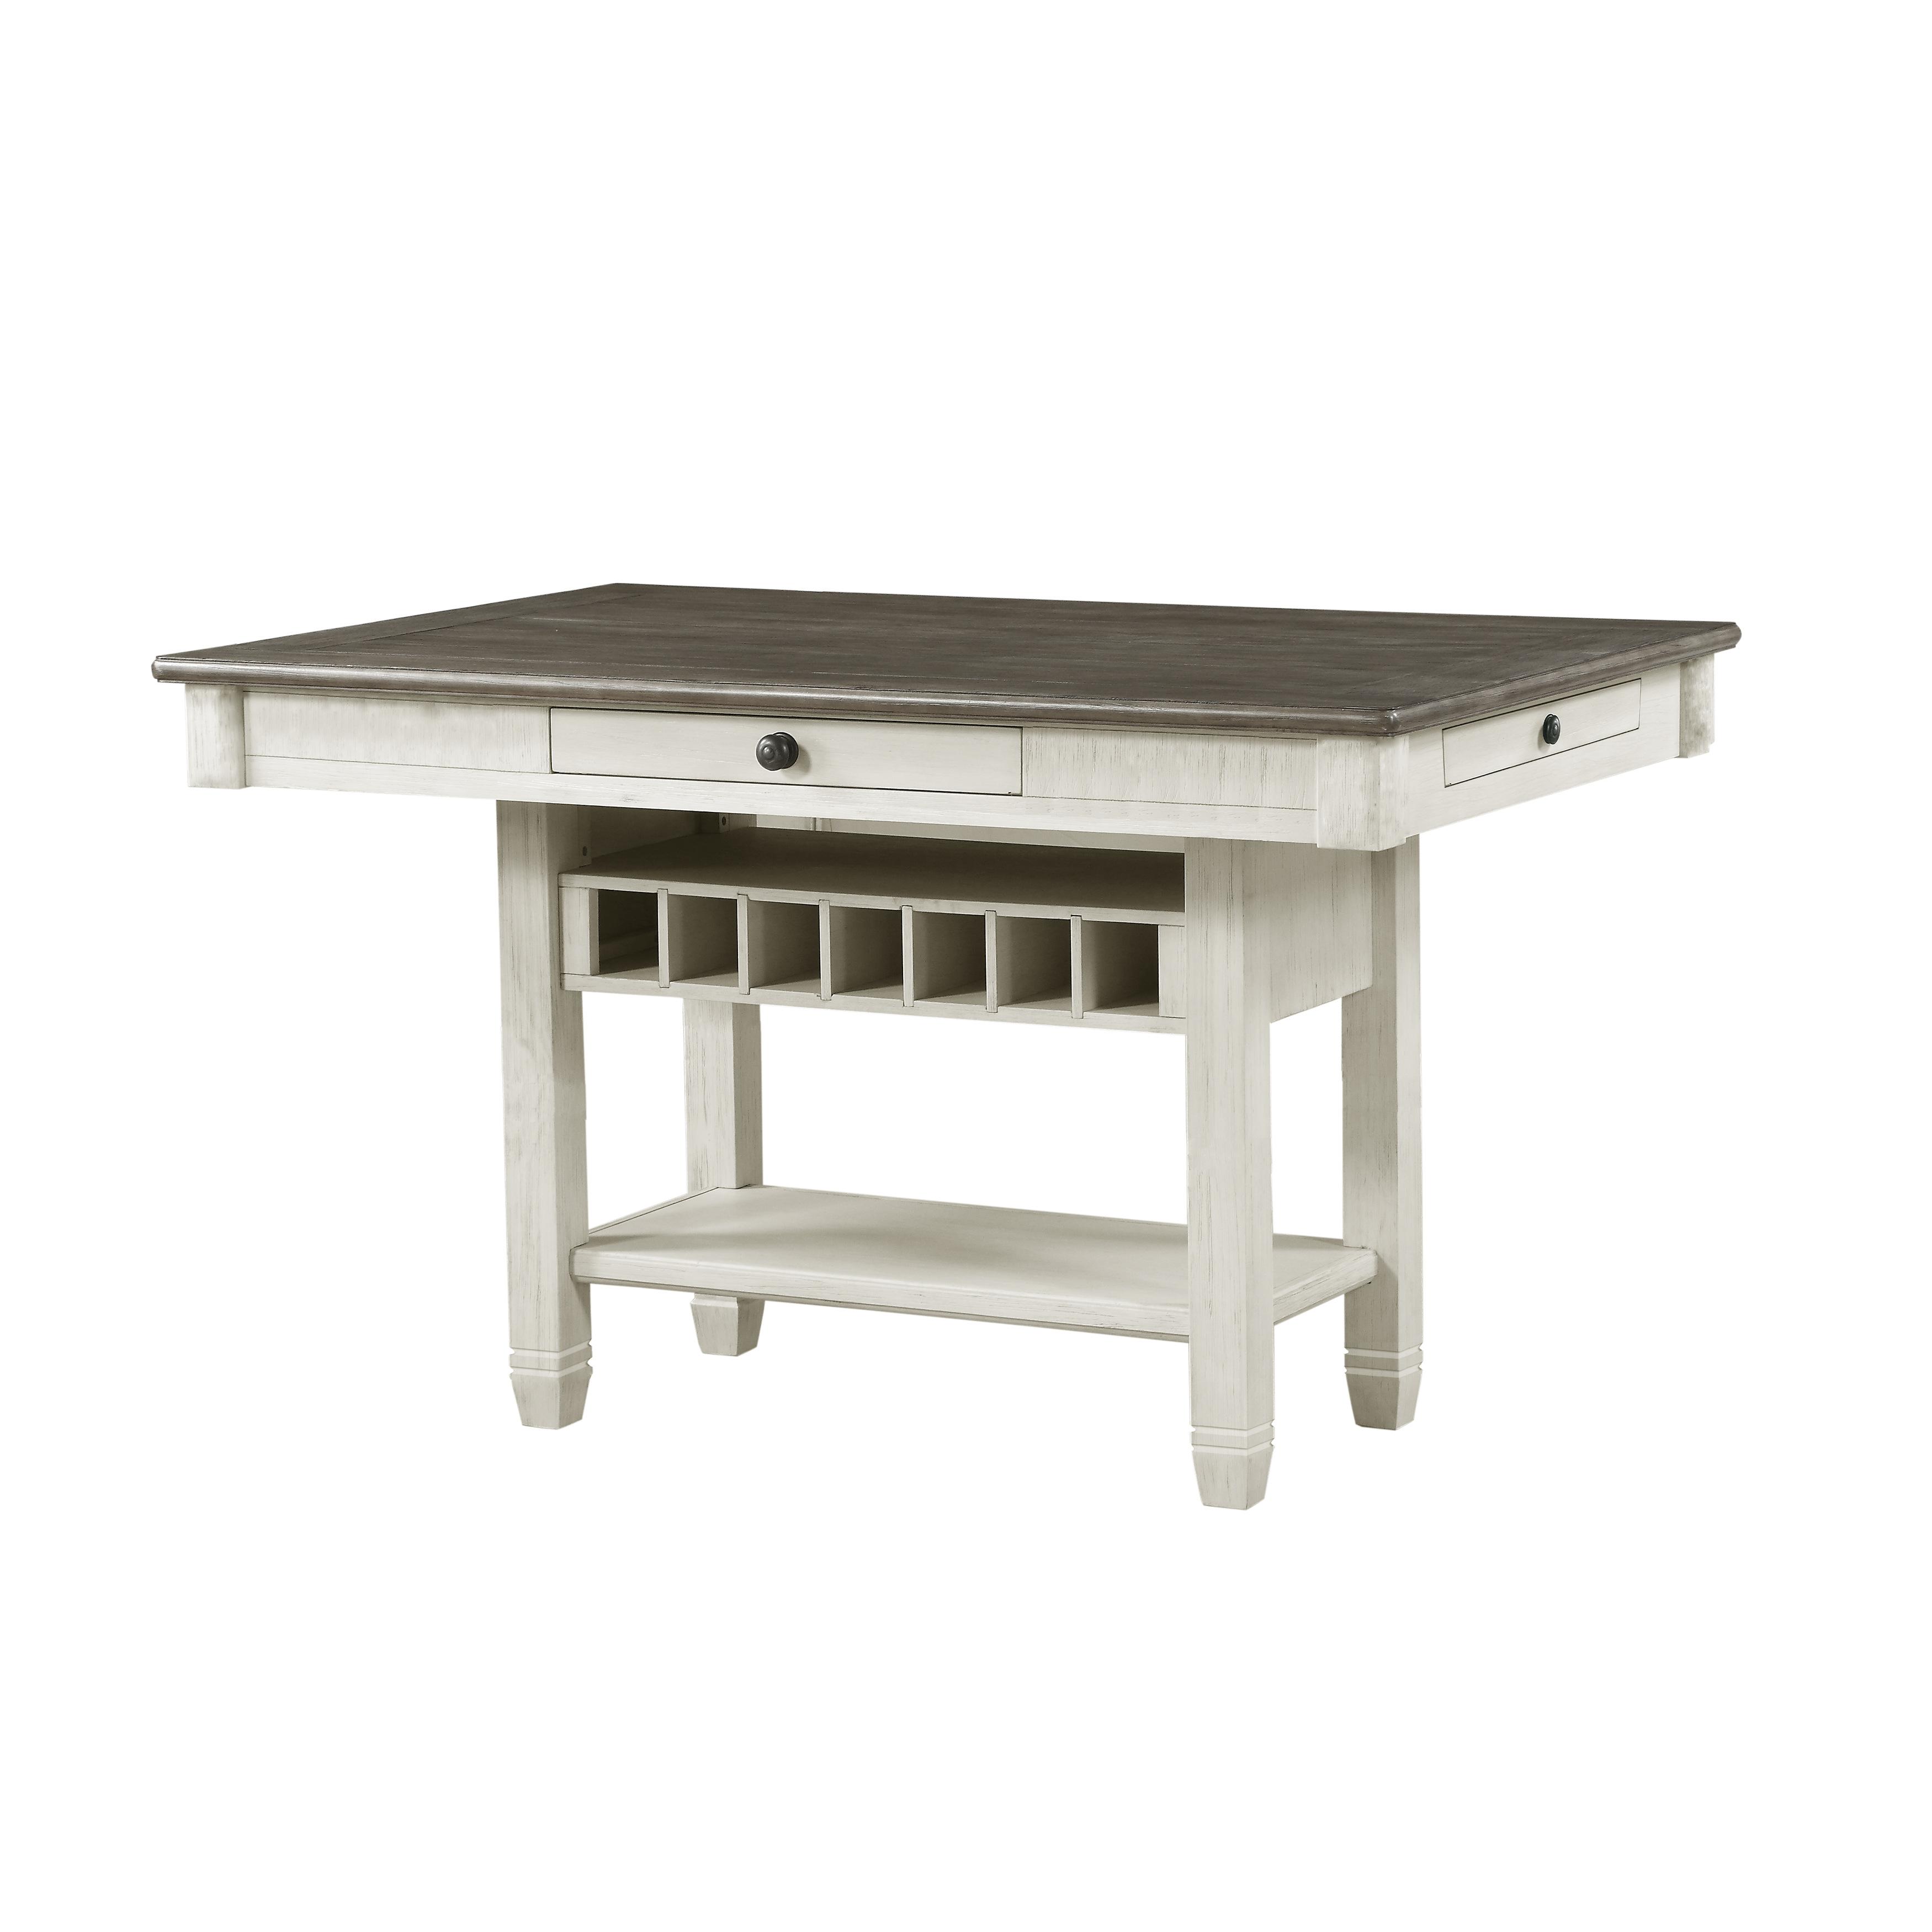 Casual Counter Height Table 5627NW-36* Granby 5627NW-36* in Antique White 